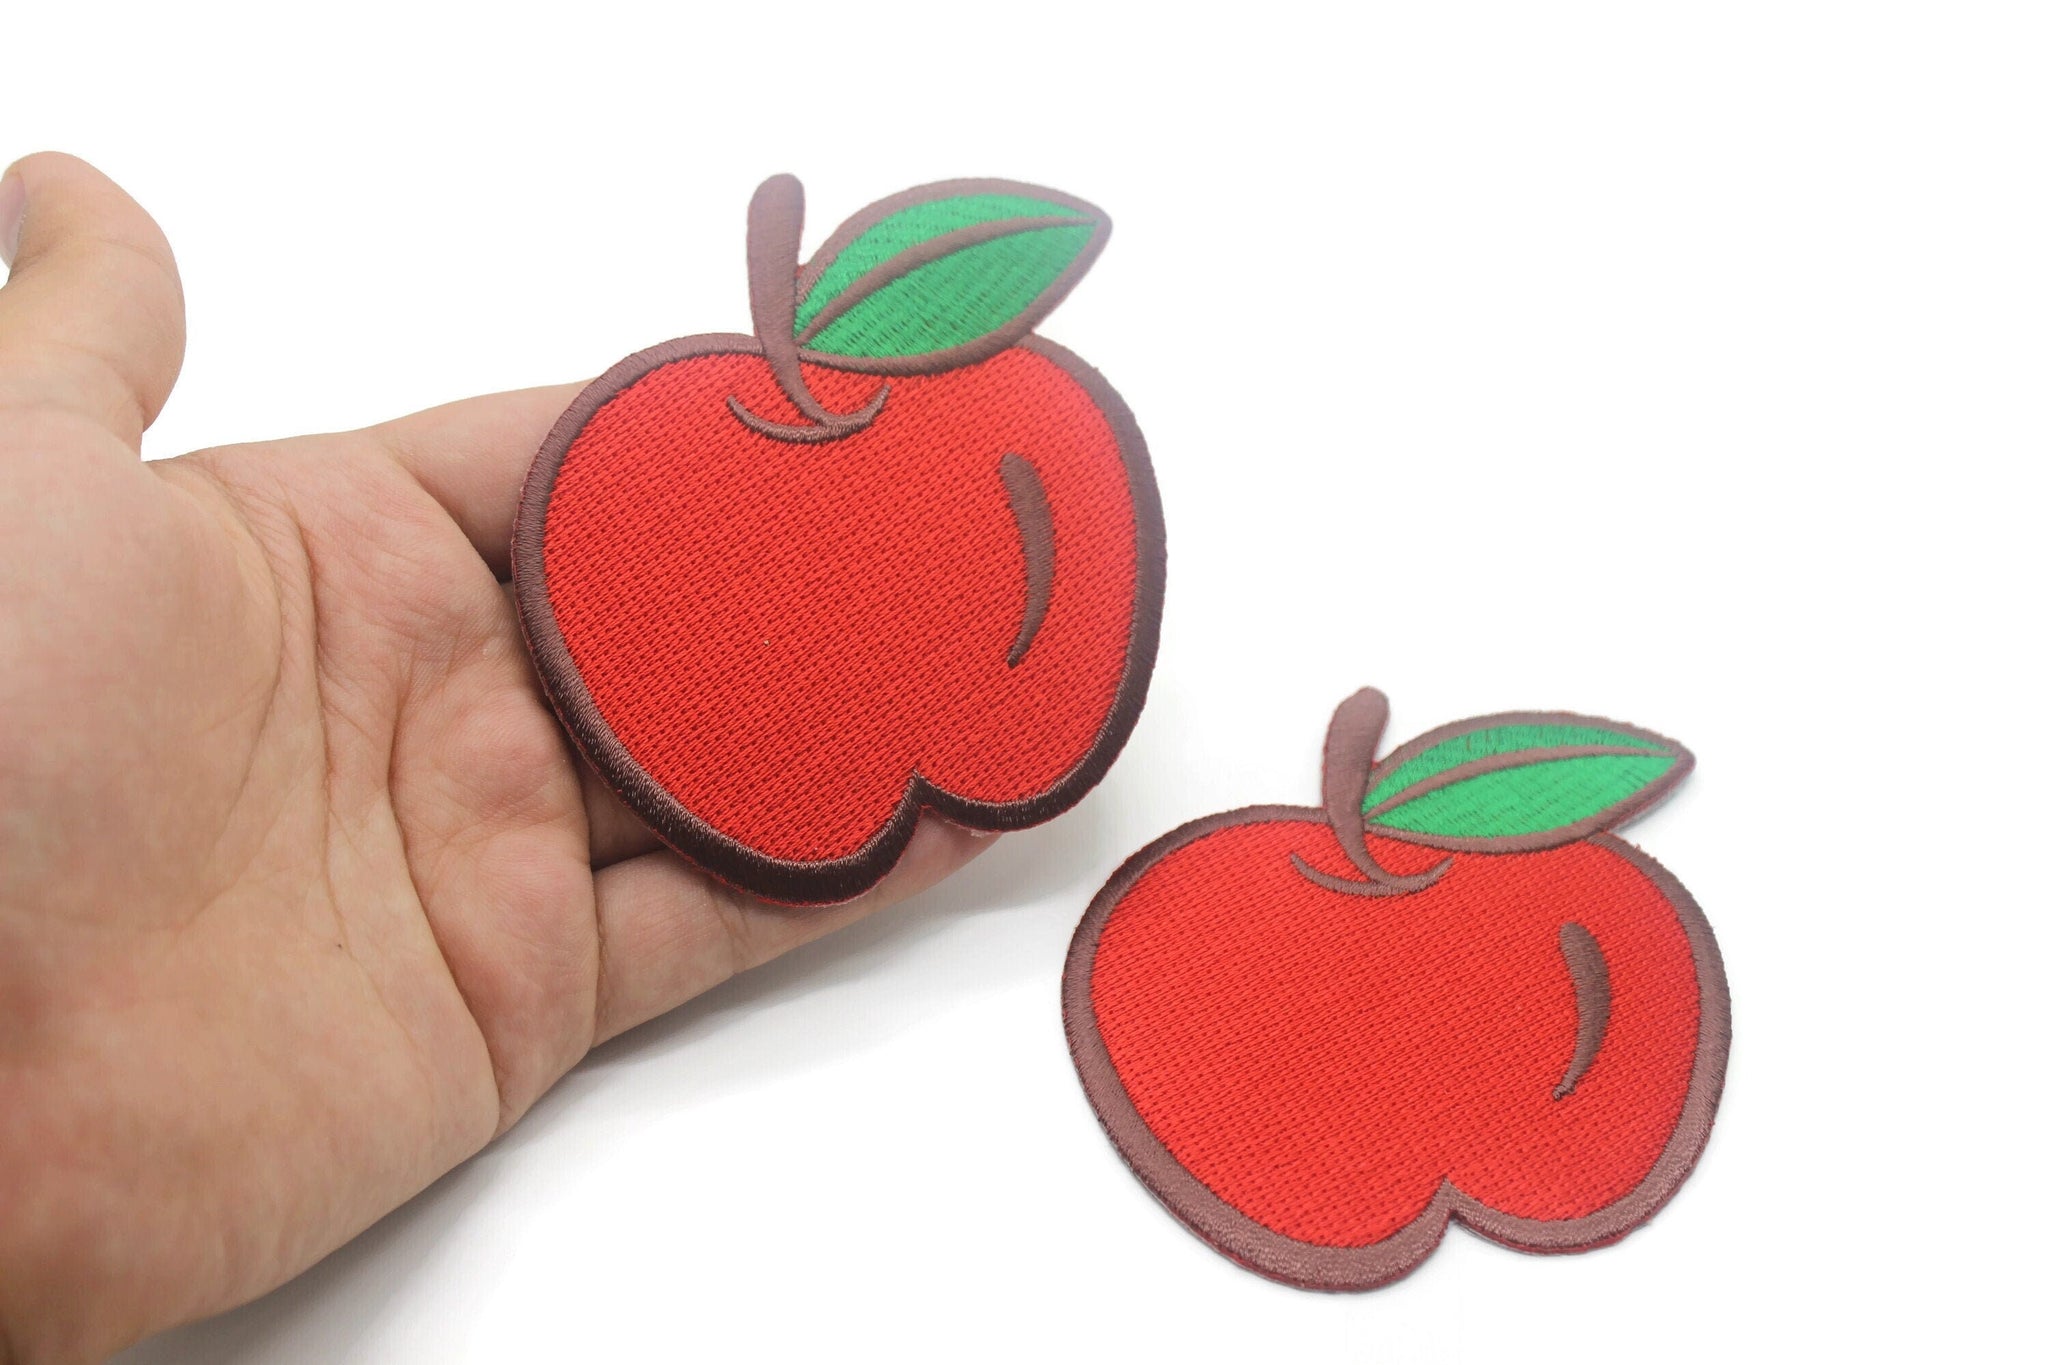 12 Pcs Apple Patch 3.58 Inch Iron On Patch Embroidery, Custom Patch, High Quality Sew On Badge for Denim, Sew On Patch, Fruit Appliques